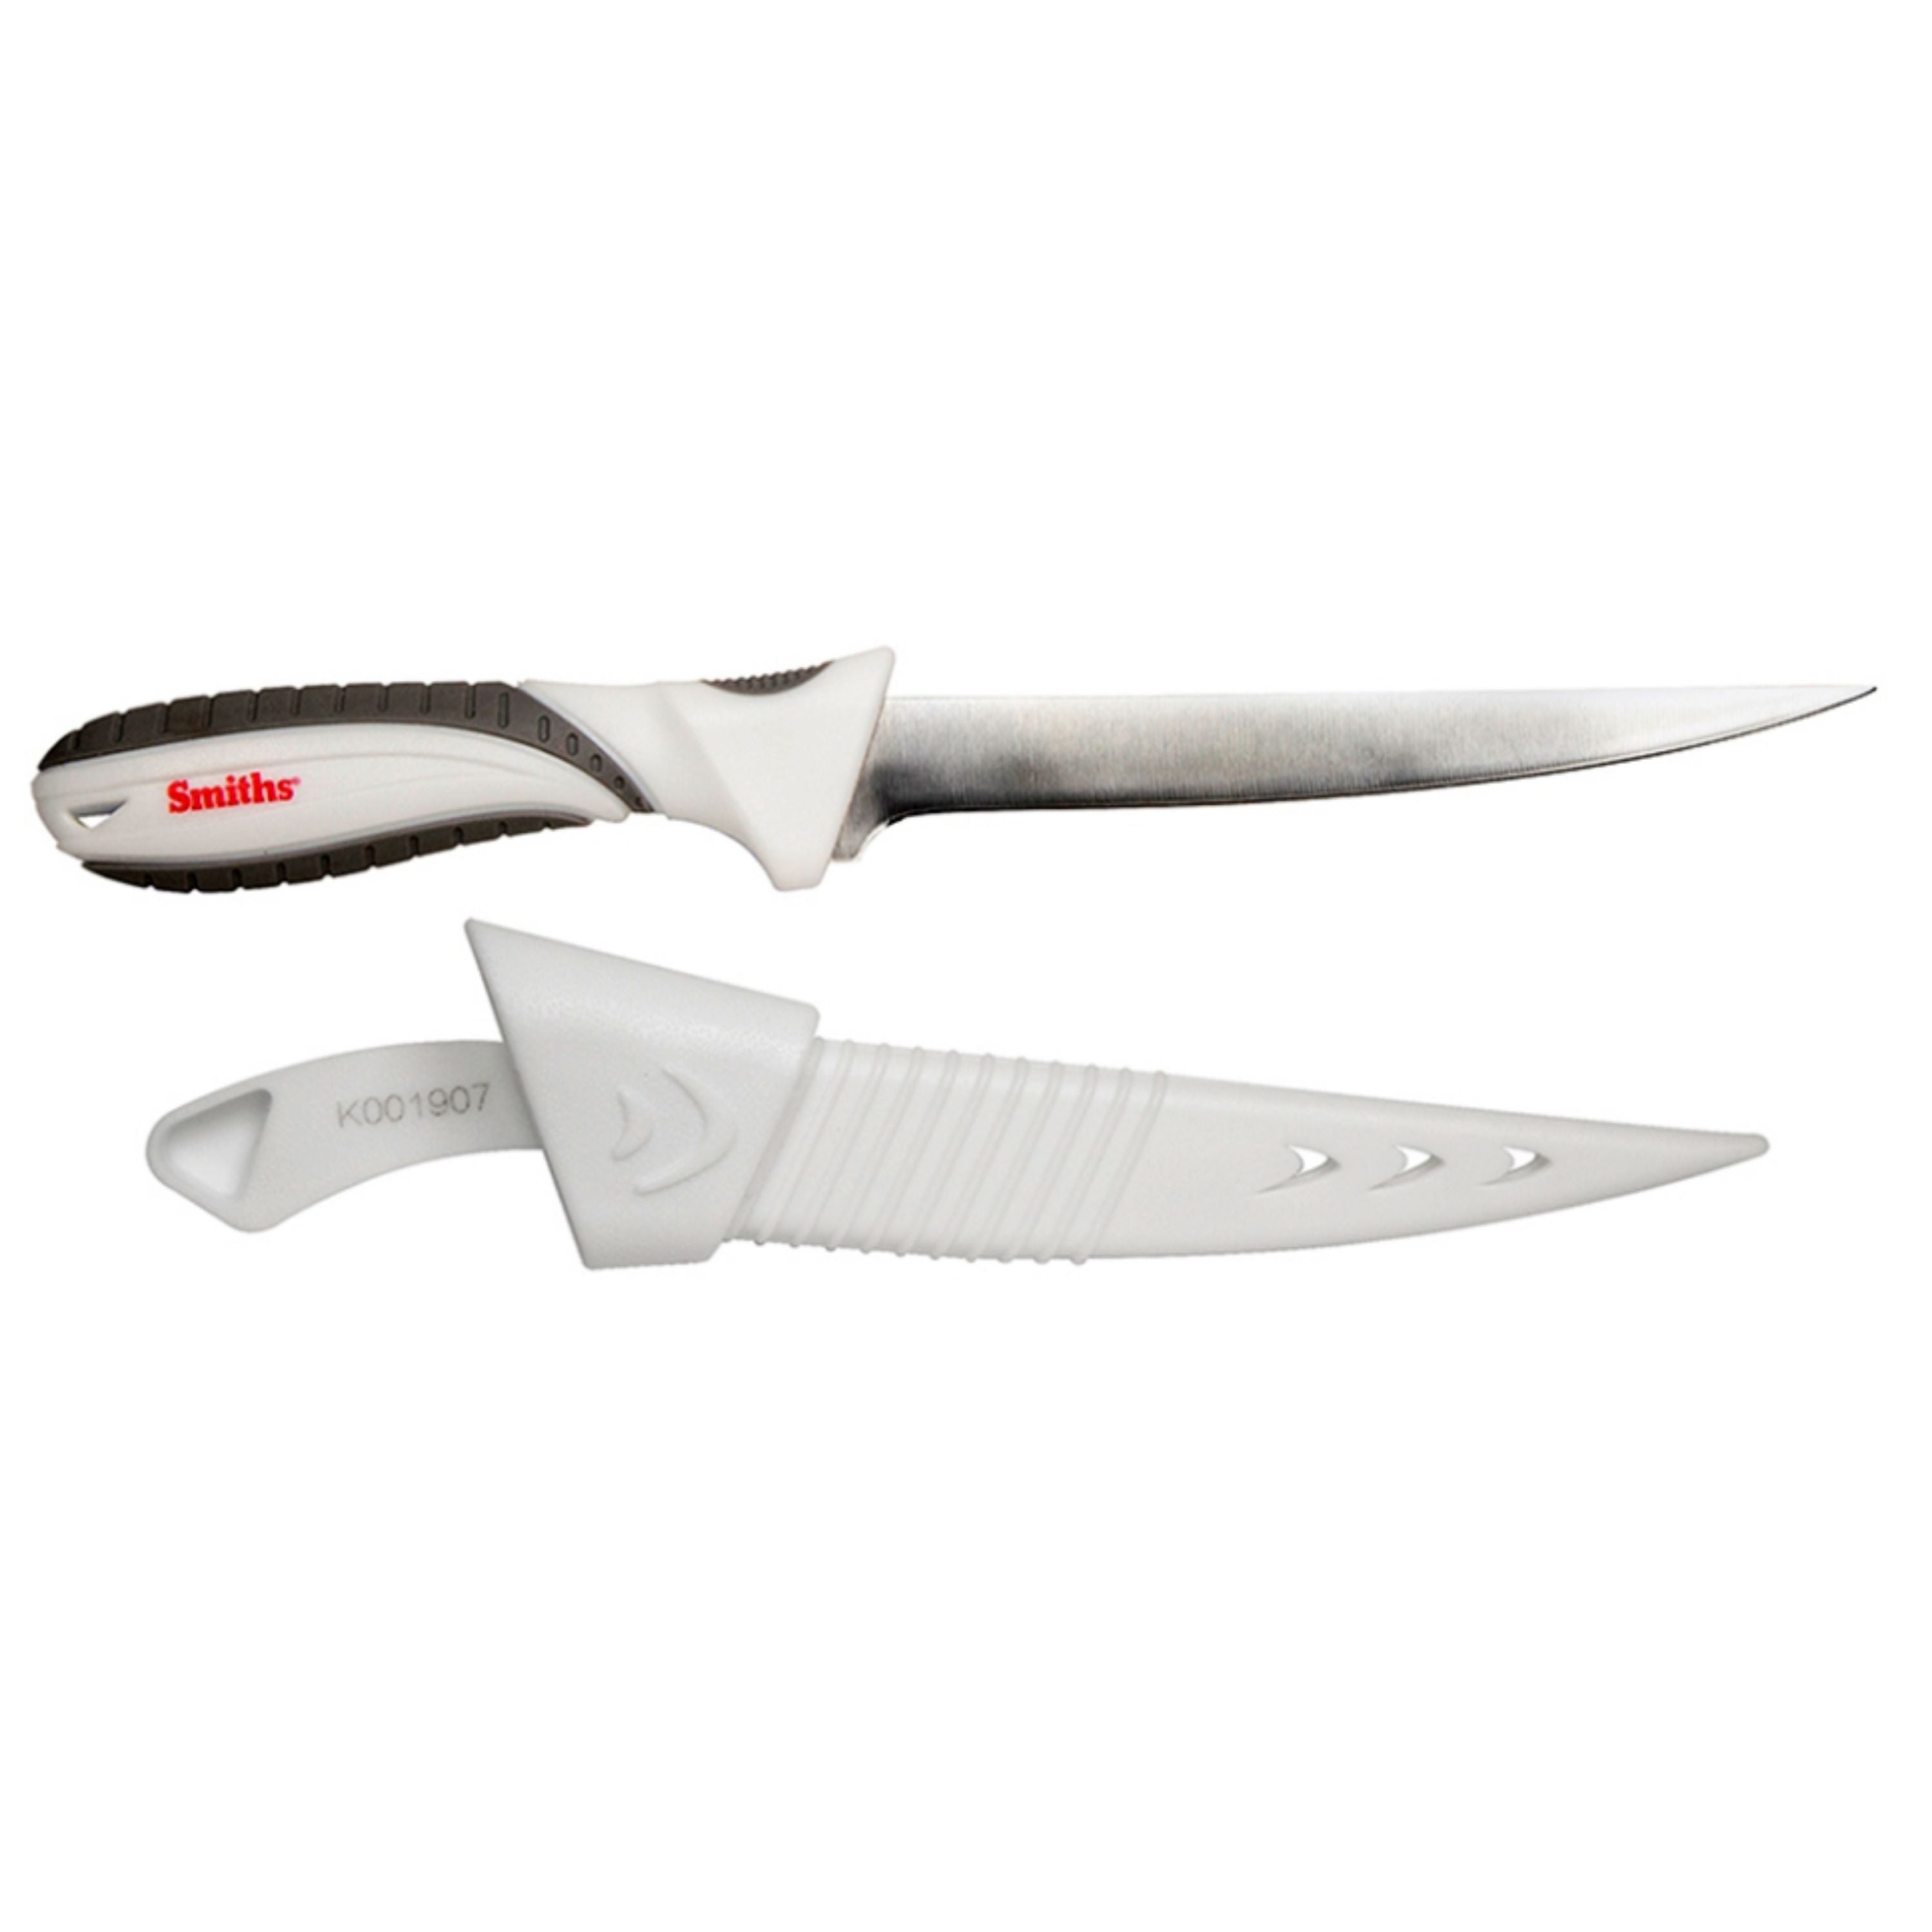 "Lawaia" stainless fillet knife - 7 in